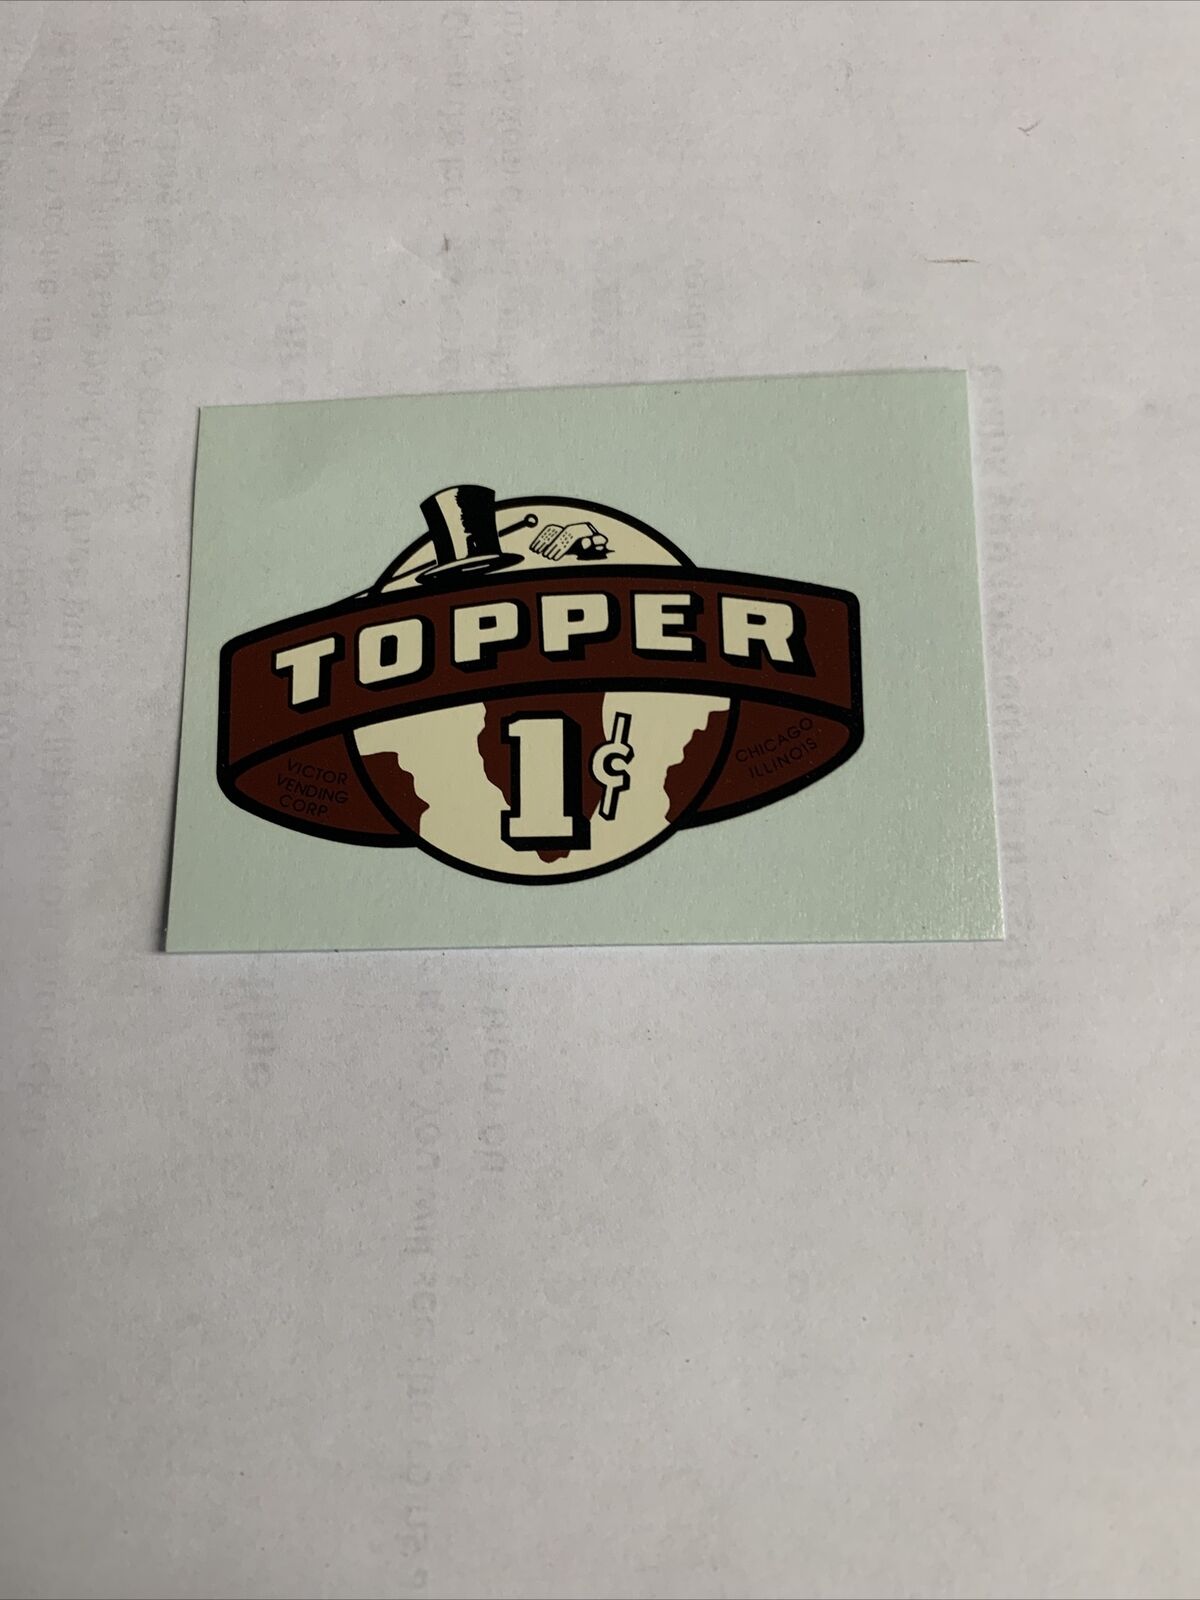 Victor Topper 1cent Price Decal